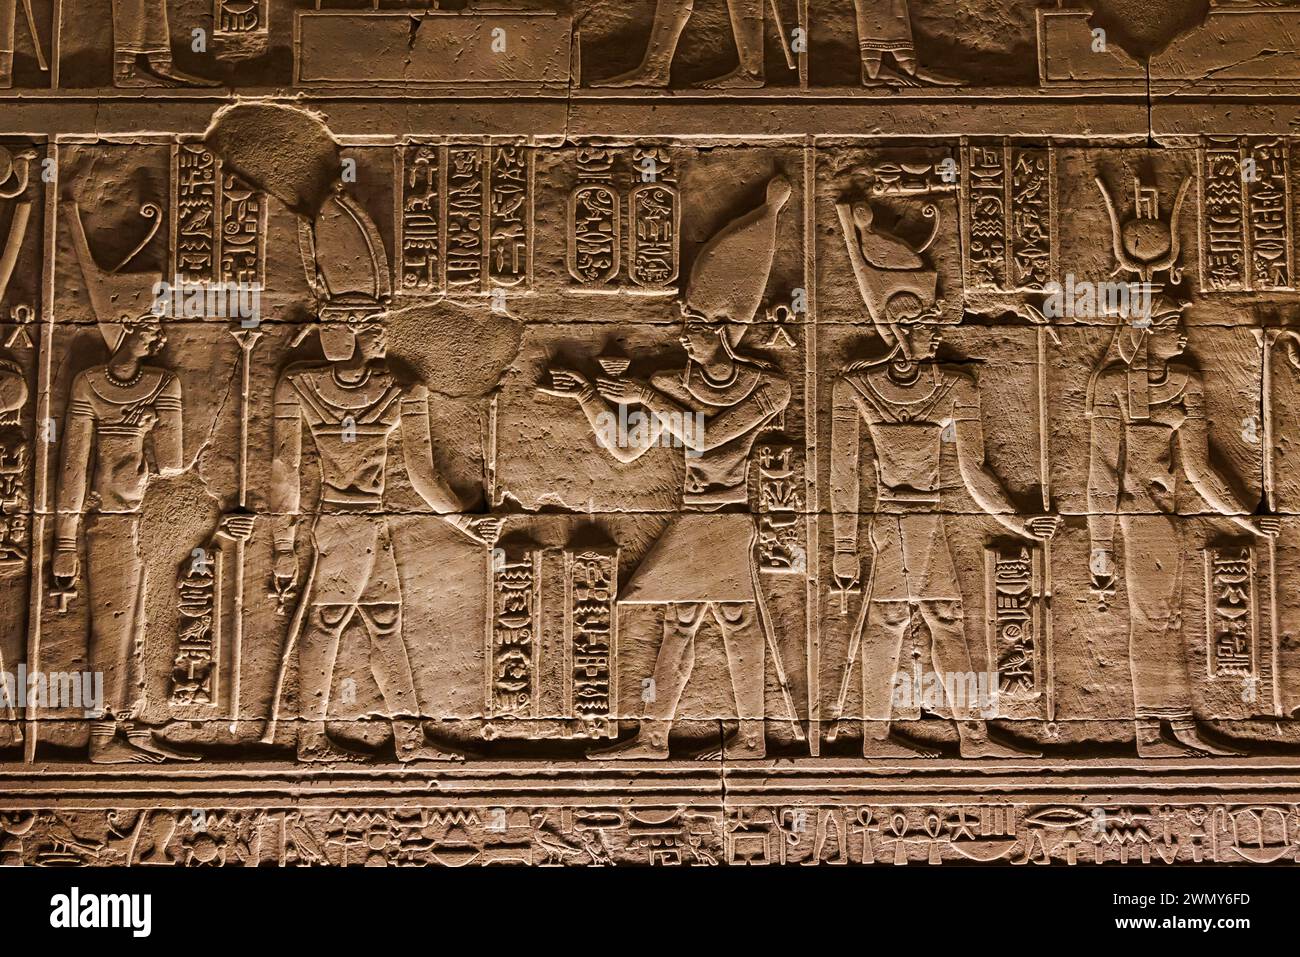 Egypt, Aswan, Nubian Monuments from Abu Simbel to Philae listed as World Heritage by UNESCO, Kalabsha temple, low relief on the wall Stock Photo